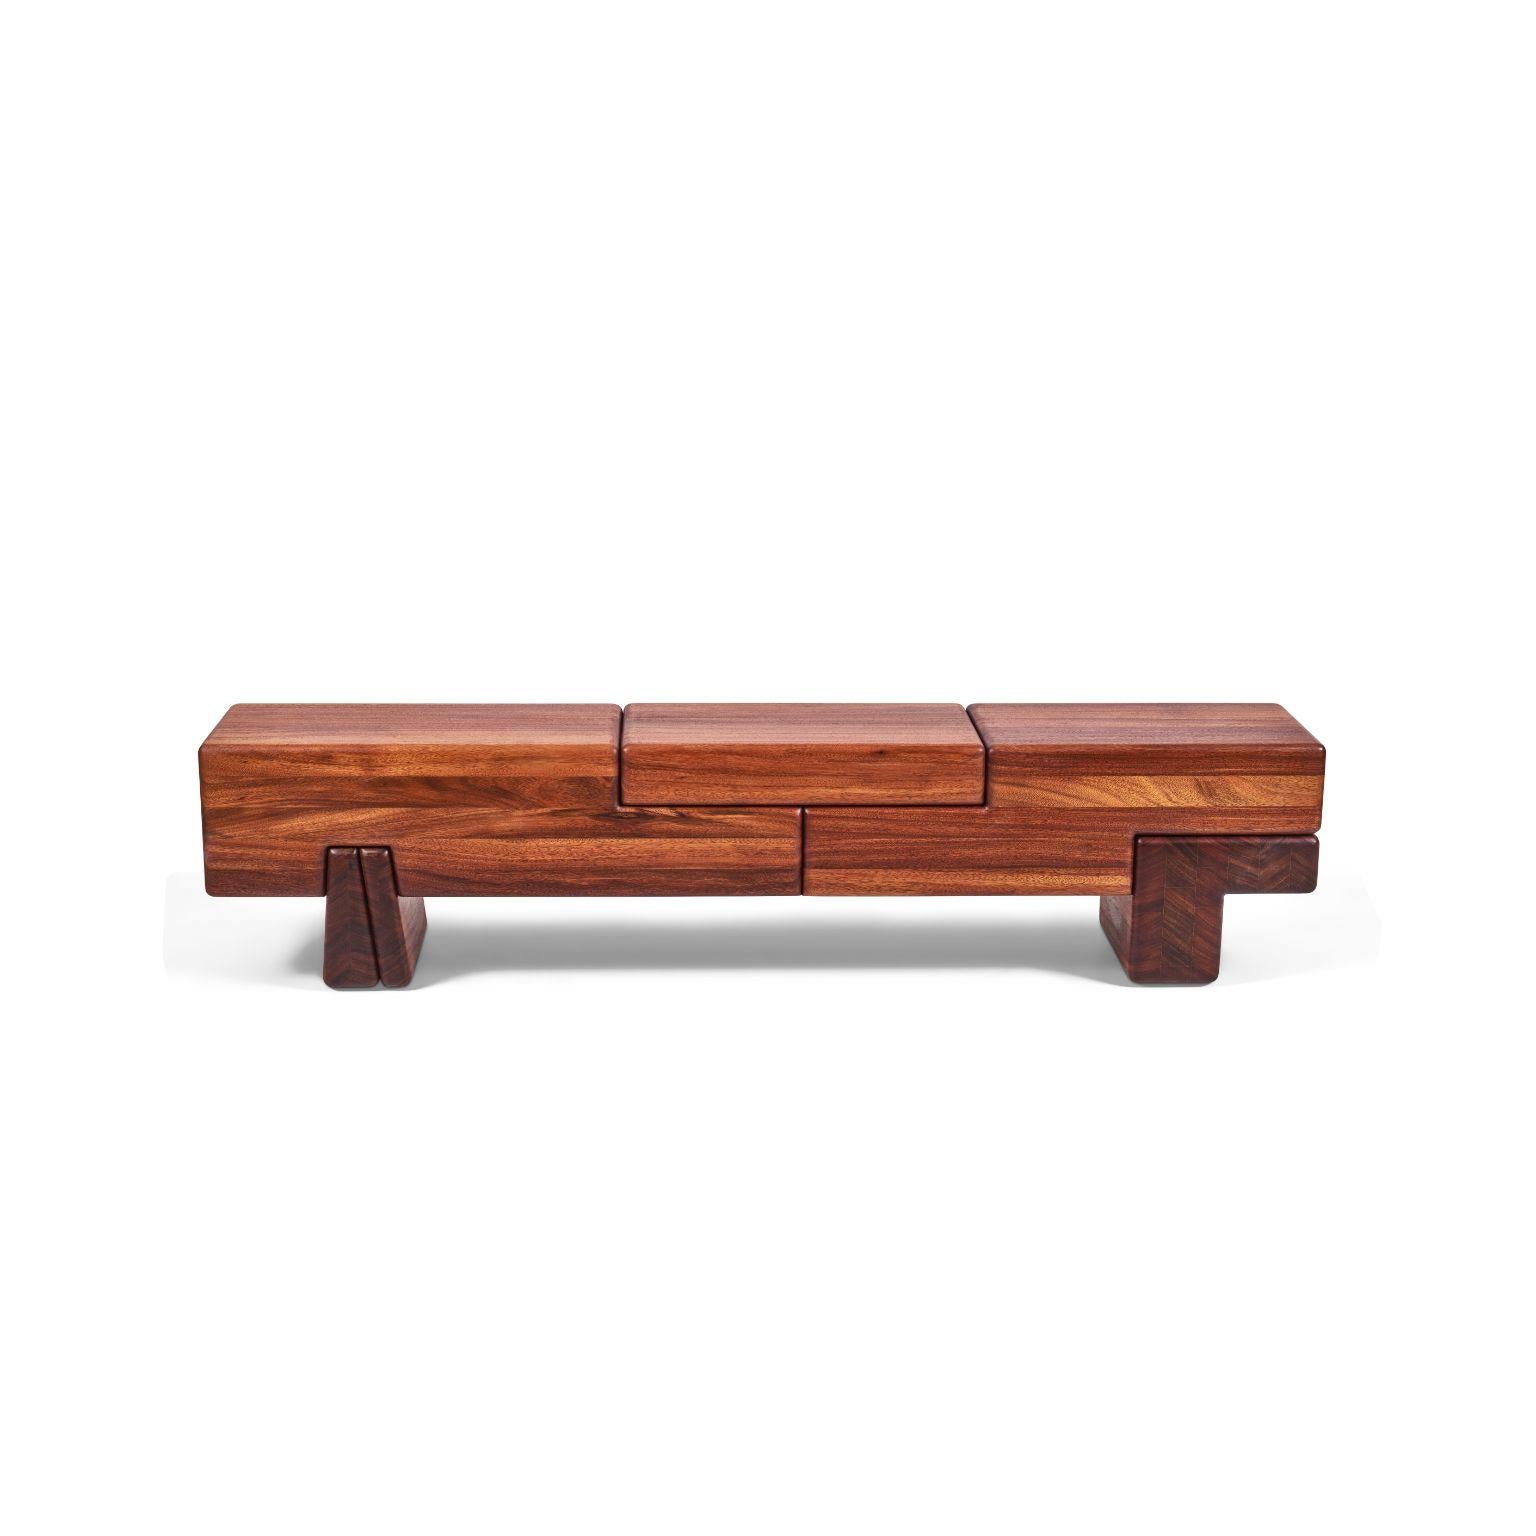 Okan D'Arfique Laminated Bench by Contemporary Ecowood
Dimensions: W 176 x D 32 x H 39 cm
Materials: Okan
Finishing: Monocoat Wood Oil

Contemporary Ecowood’s story began in a craft workshop in 2009. Our wood passion made us focus on fallen